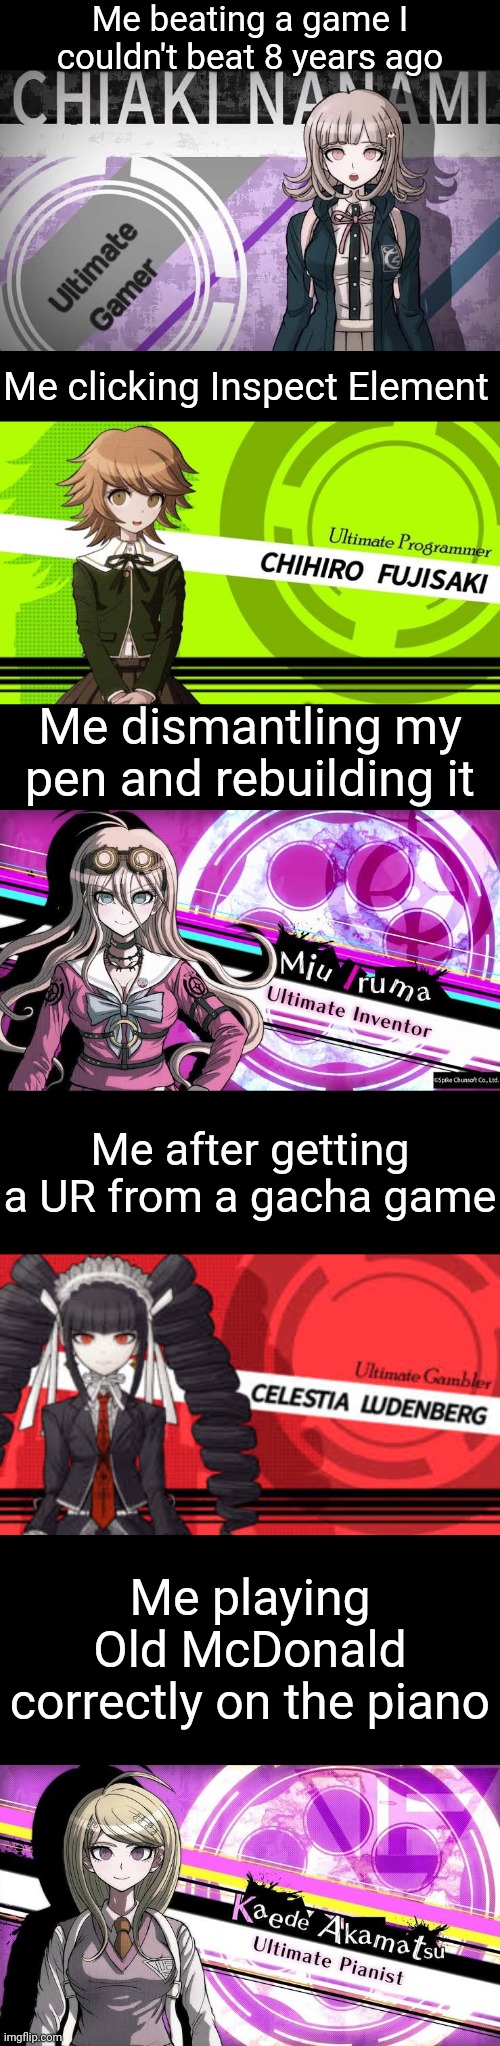 Danganronpa Ultimate Memes pt.1 | Me beating a game I couldn't beat 8 years ago; Me clicking Inspect Element; Me dismantling my pen and rebuilding it; Me after getting a UR from a gacha game; Me playing Old McDonald correctly on the piano | image tagged in danganronpa | made w/ Imgflip meme maker